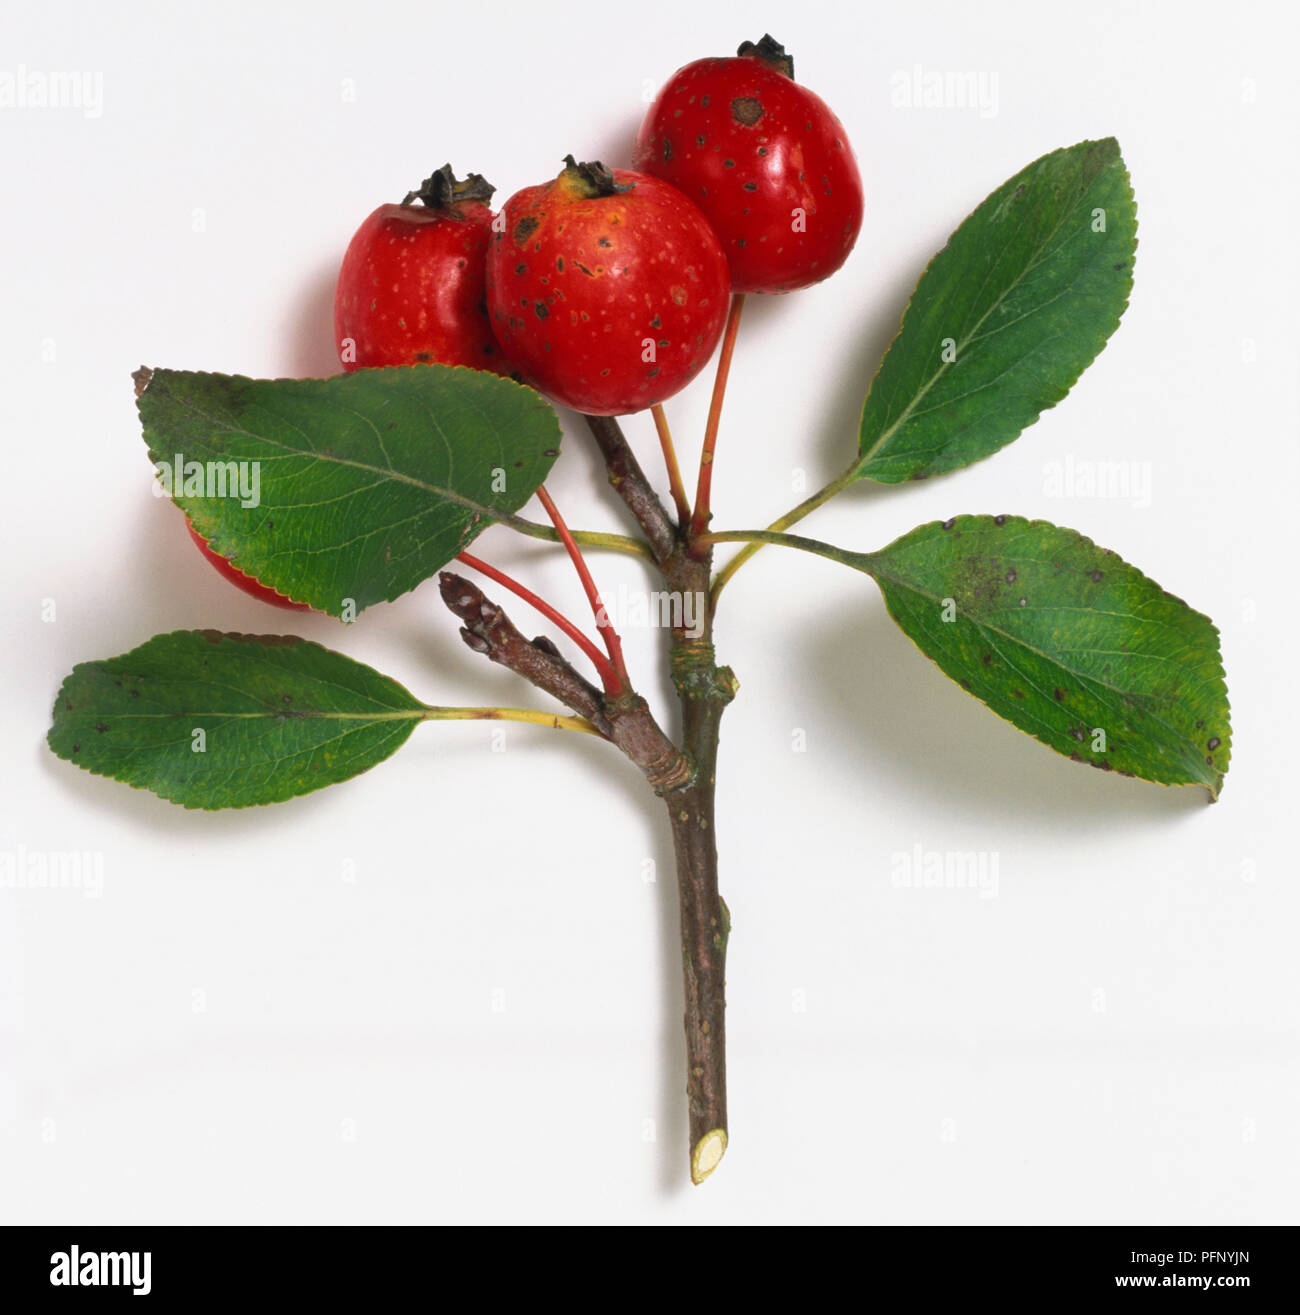 Rosaceae, Malus prunifolia, dark stem with eliptic leaves and red fruits with persistent sepals. Stock Photo